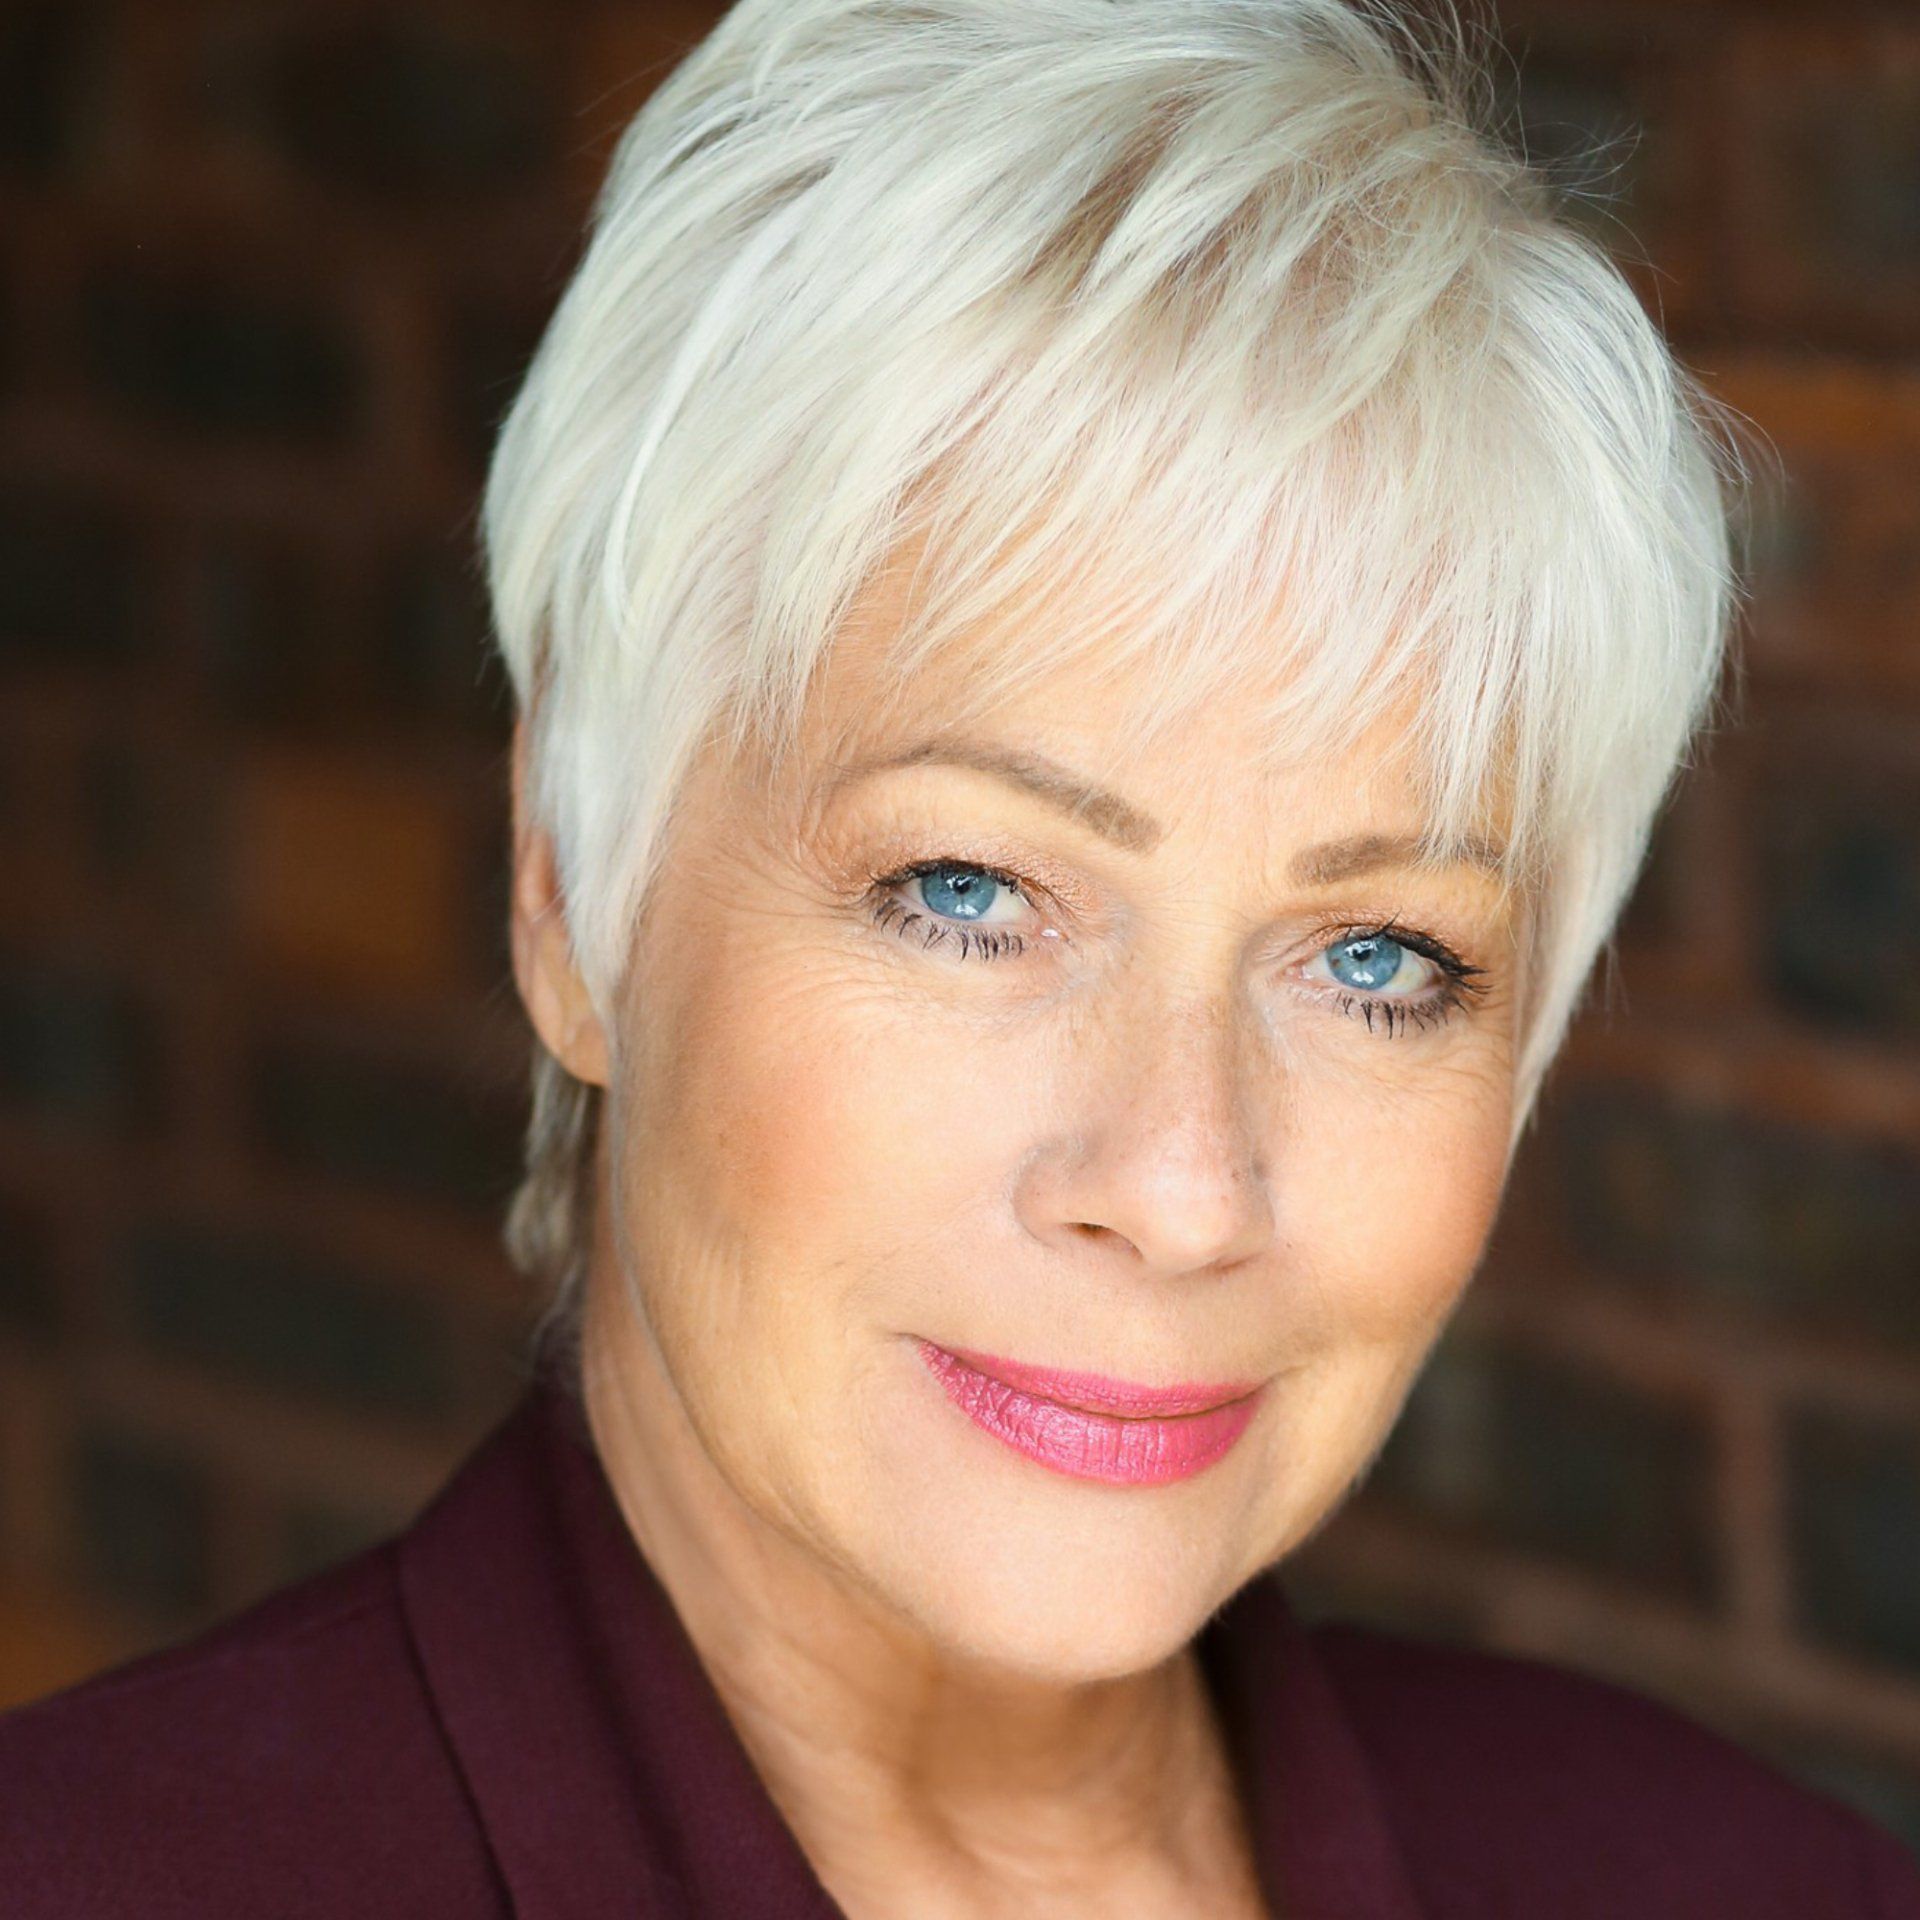 Denise Welch will be on the Live Stage at CrimeCon UK